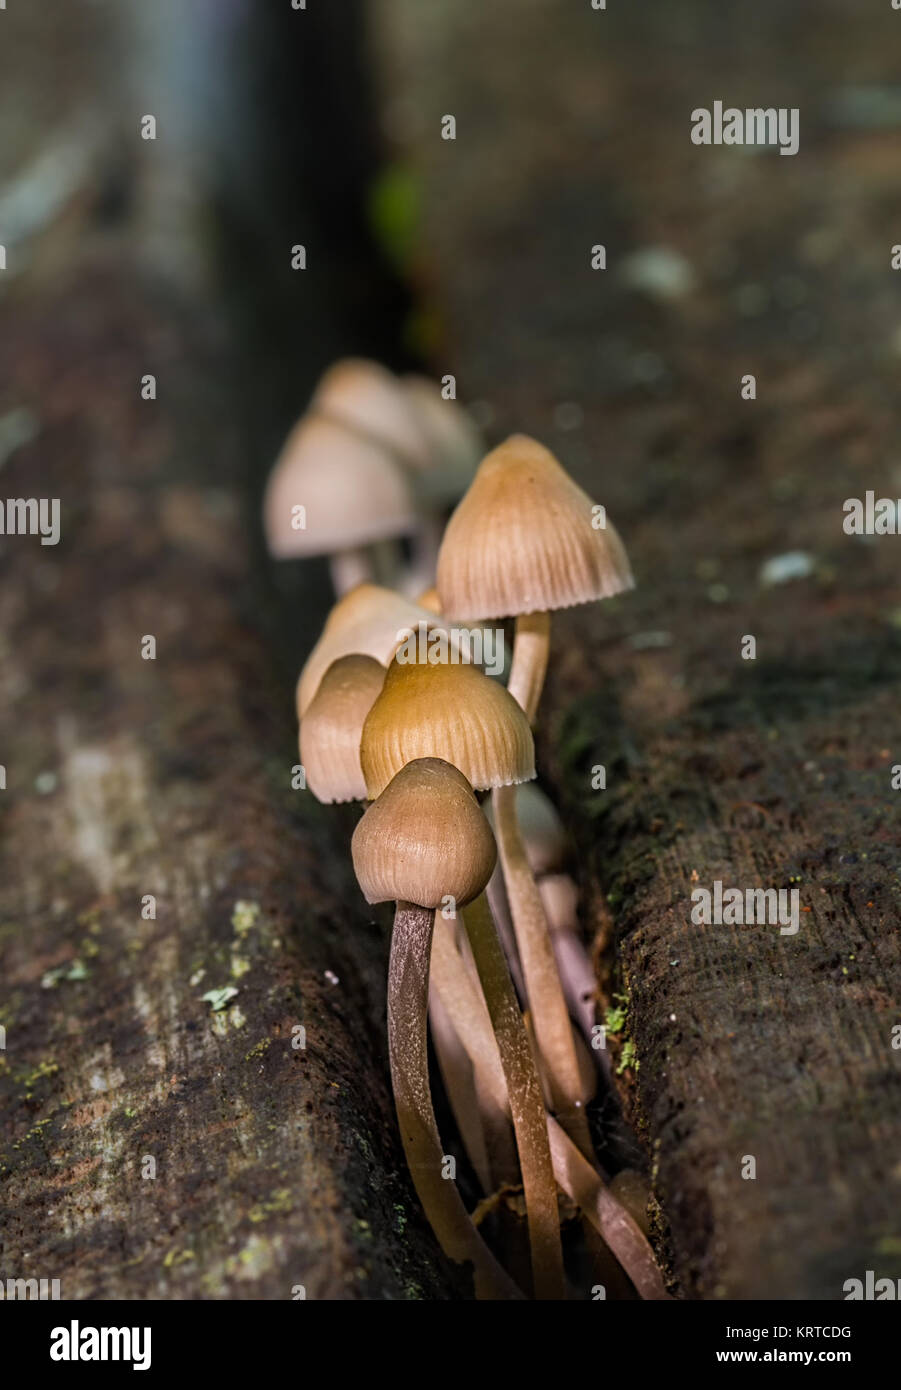 Mushrooms growing in an old brown trunk. Stock Photo